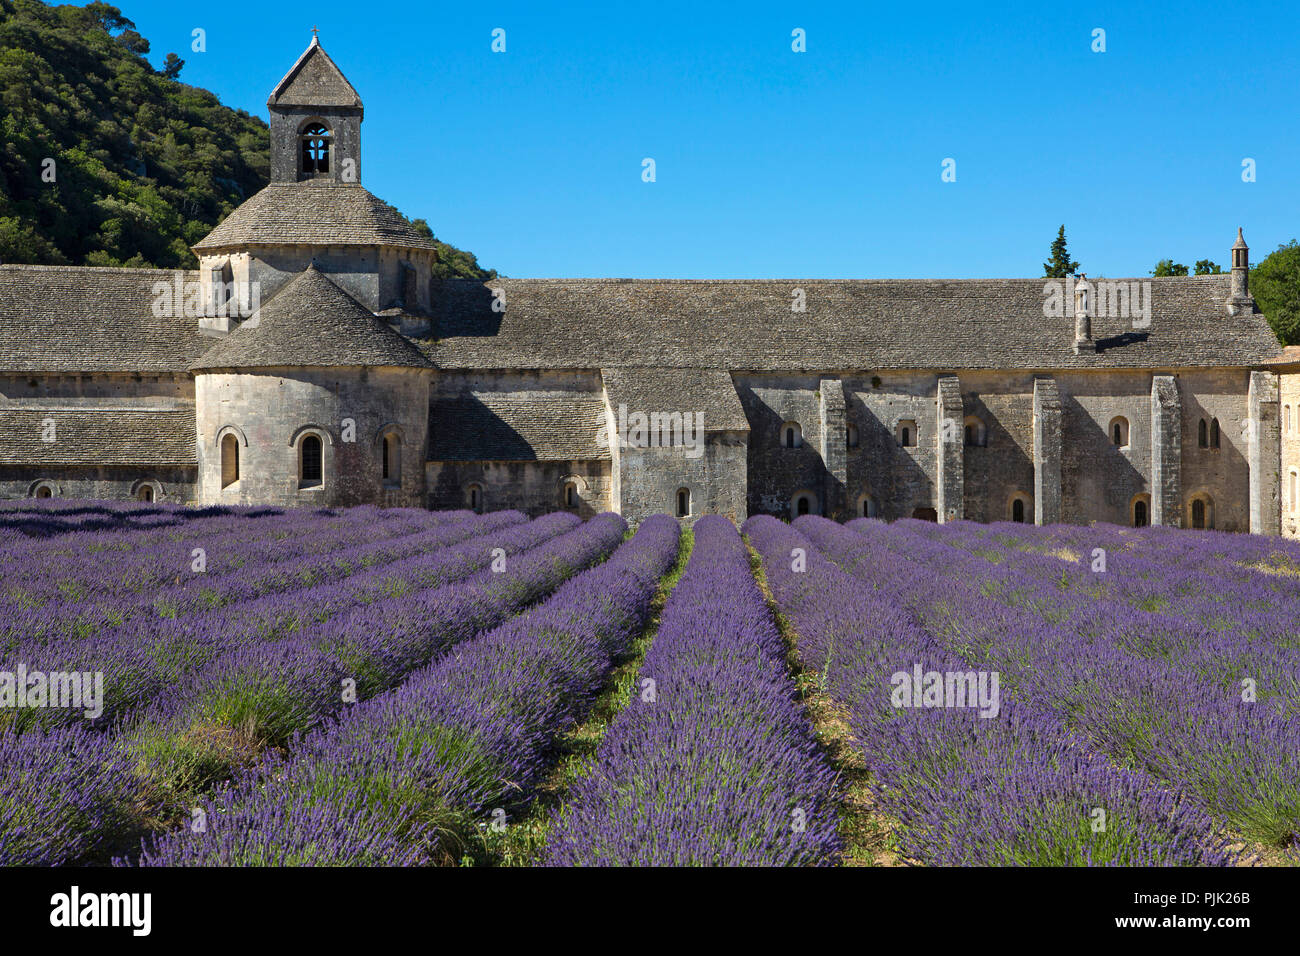 The Romanesque Cistercian Abbey of Notre Dame of Senanque, in the midst of blooming lavender fields, at Gordes, Provence, France, Europe Stock Photo